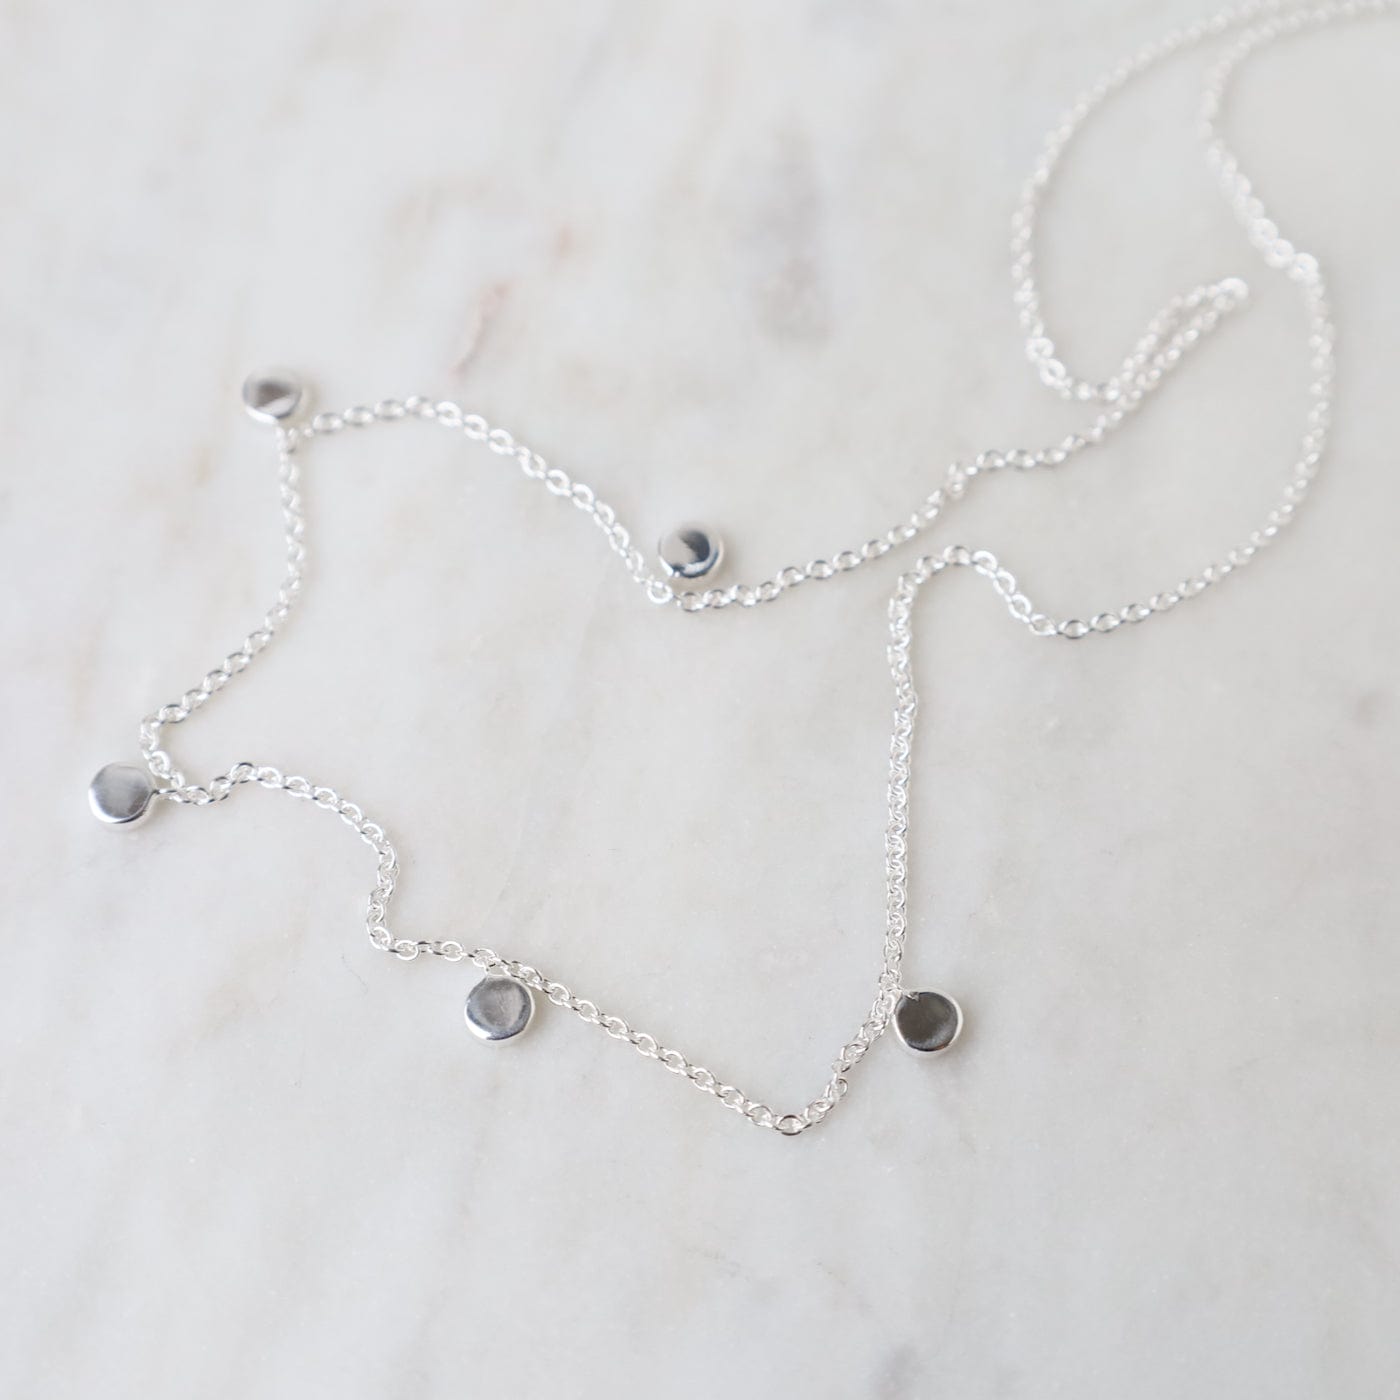 NKL Polished Sterling Silver Confetti Necklace